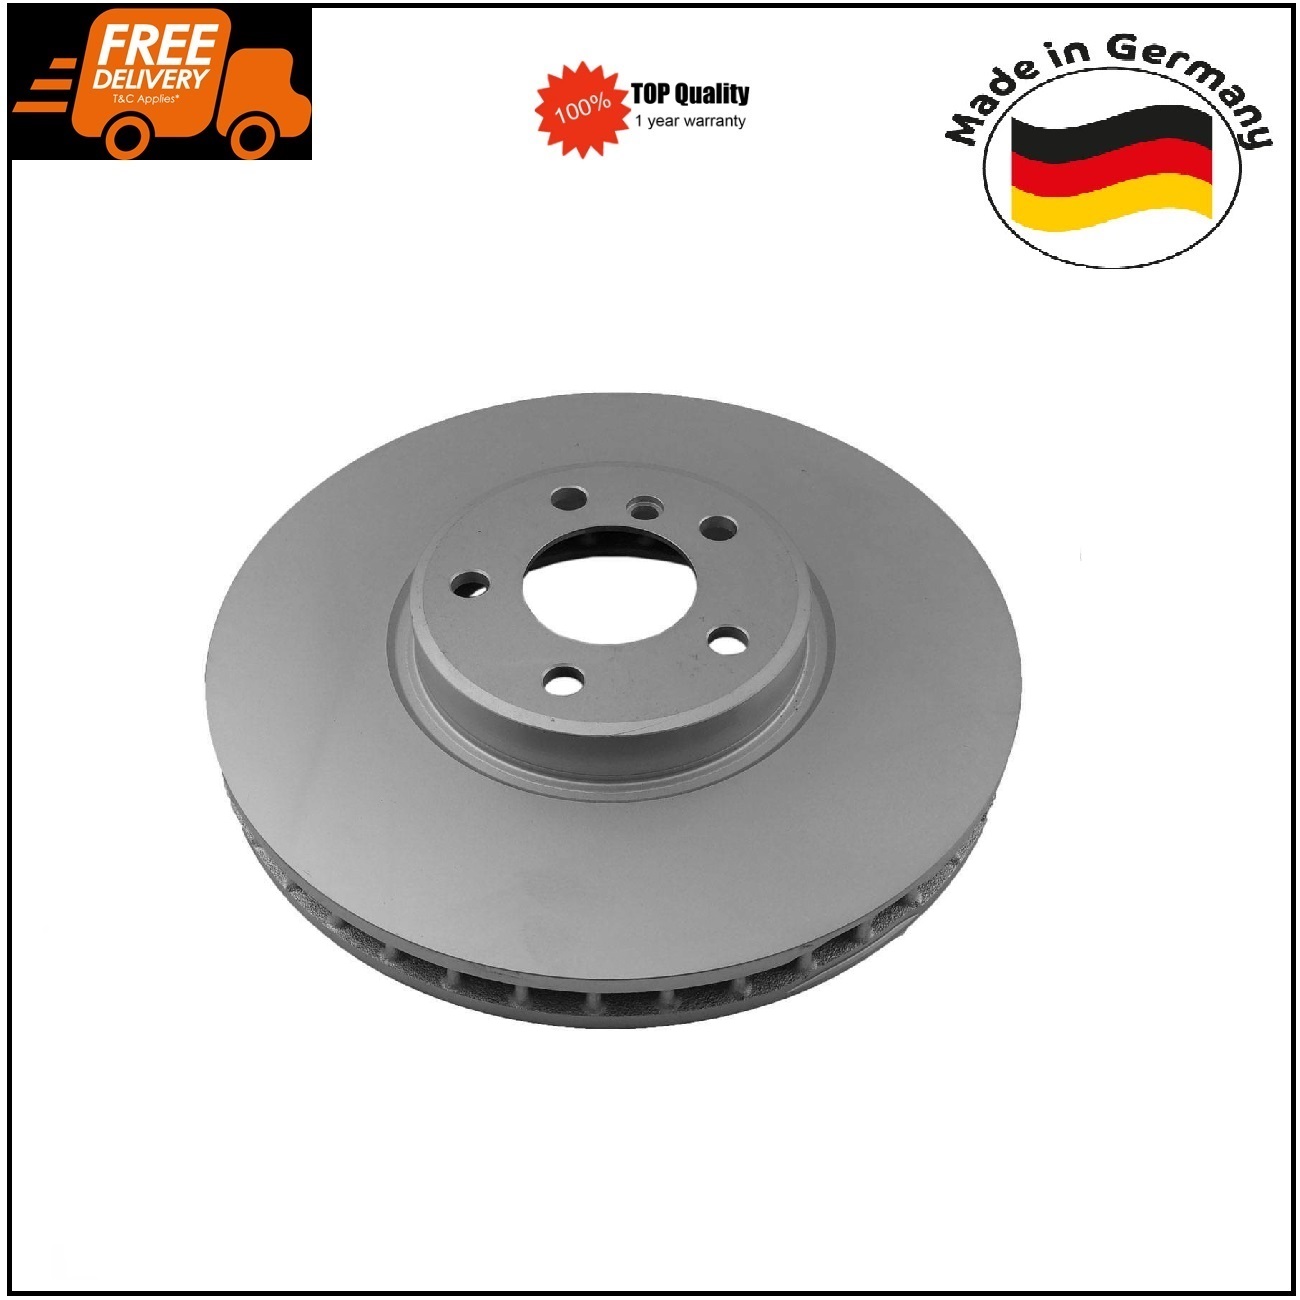 BMW Brake Disc 356mm Front for X5 E53 4.4i 4.6is 4.8is 02-06 34116756847 German Made